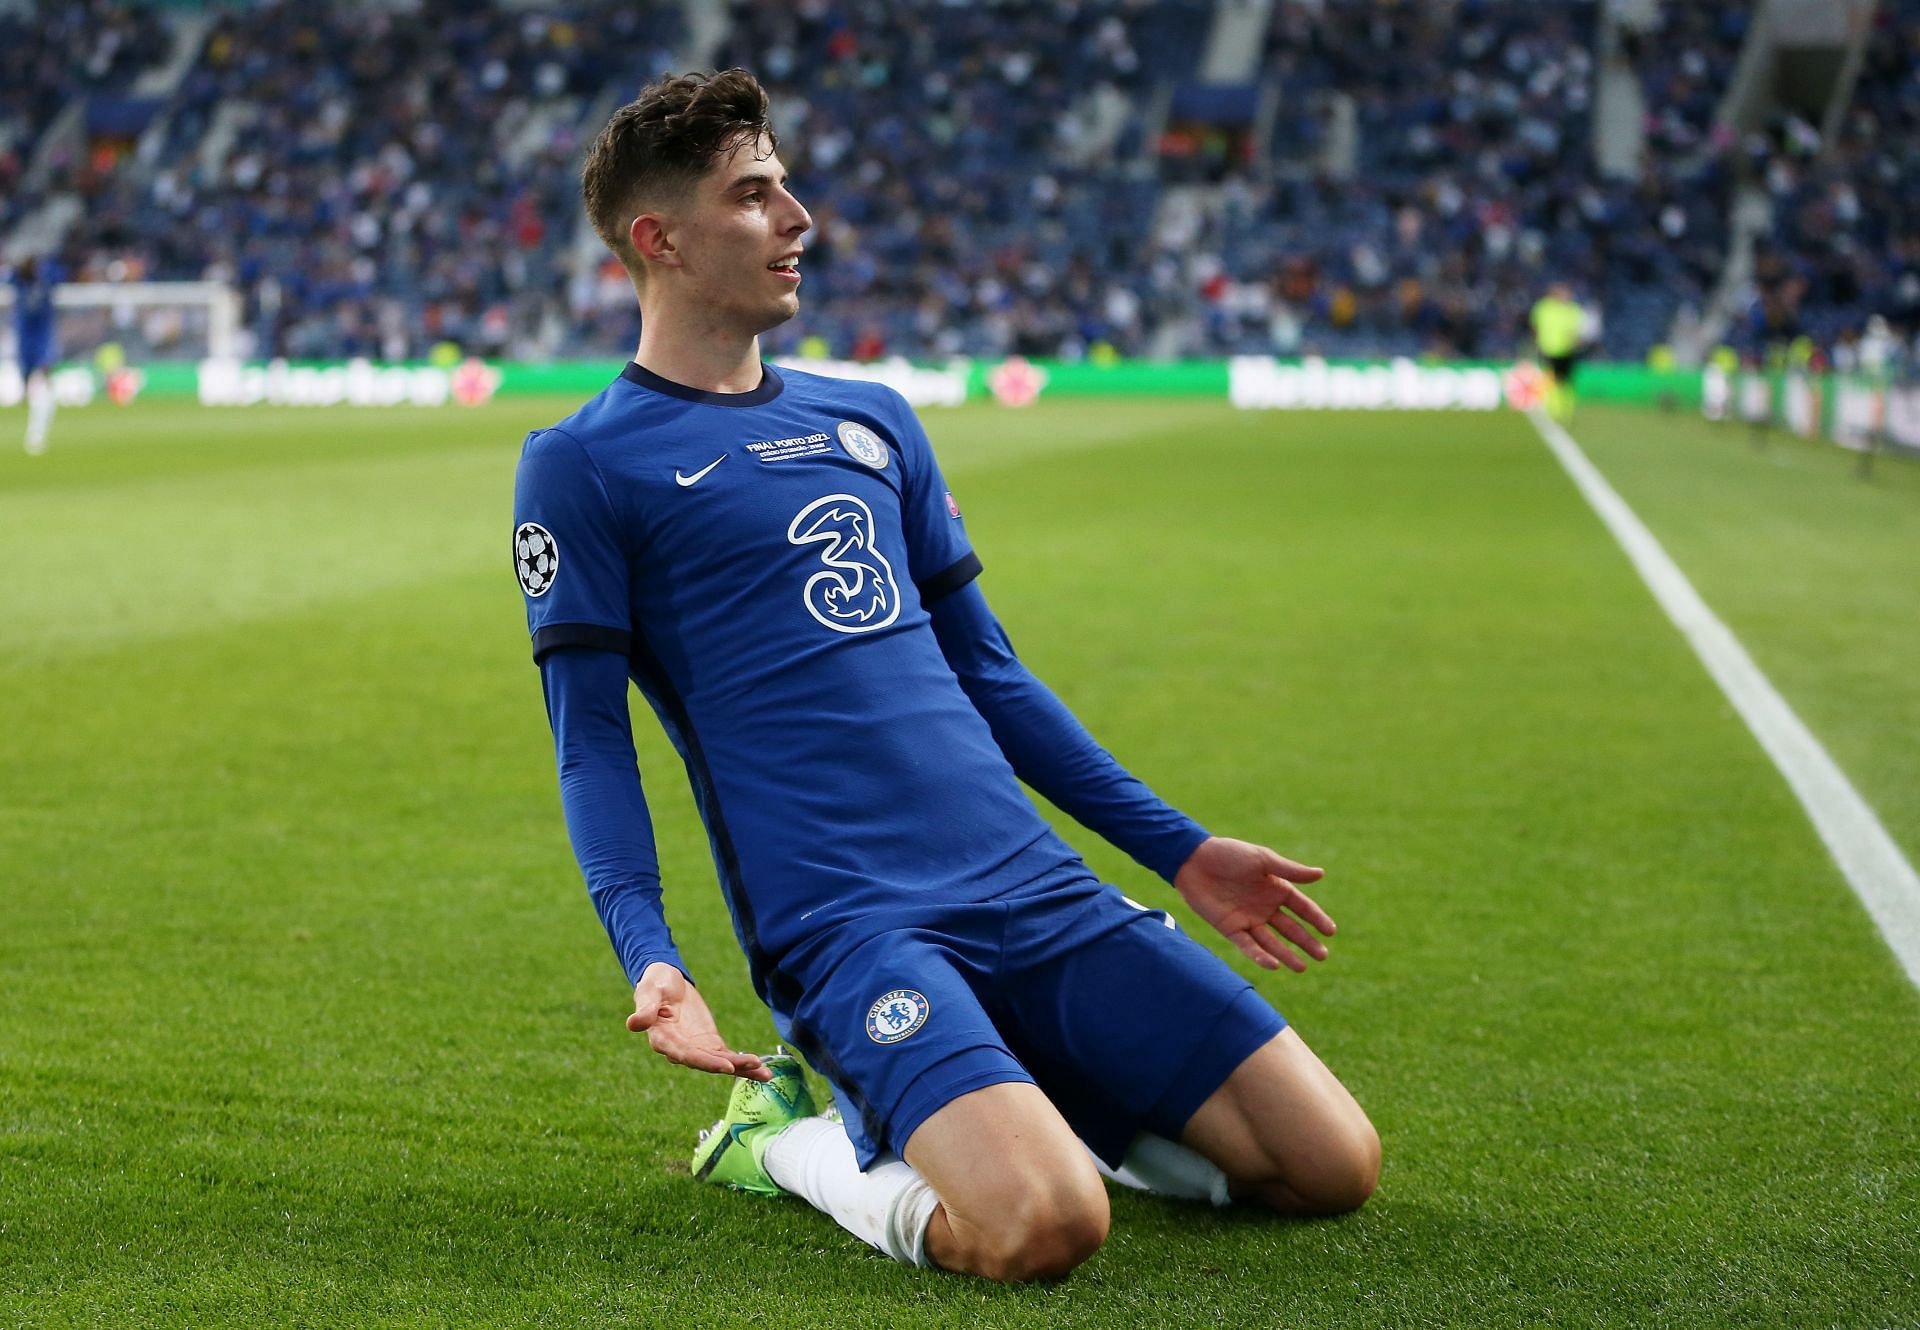 Havertz in action for the Blues